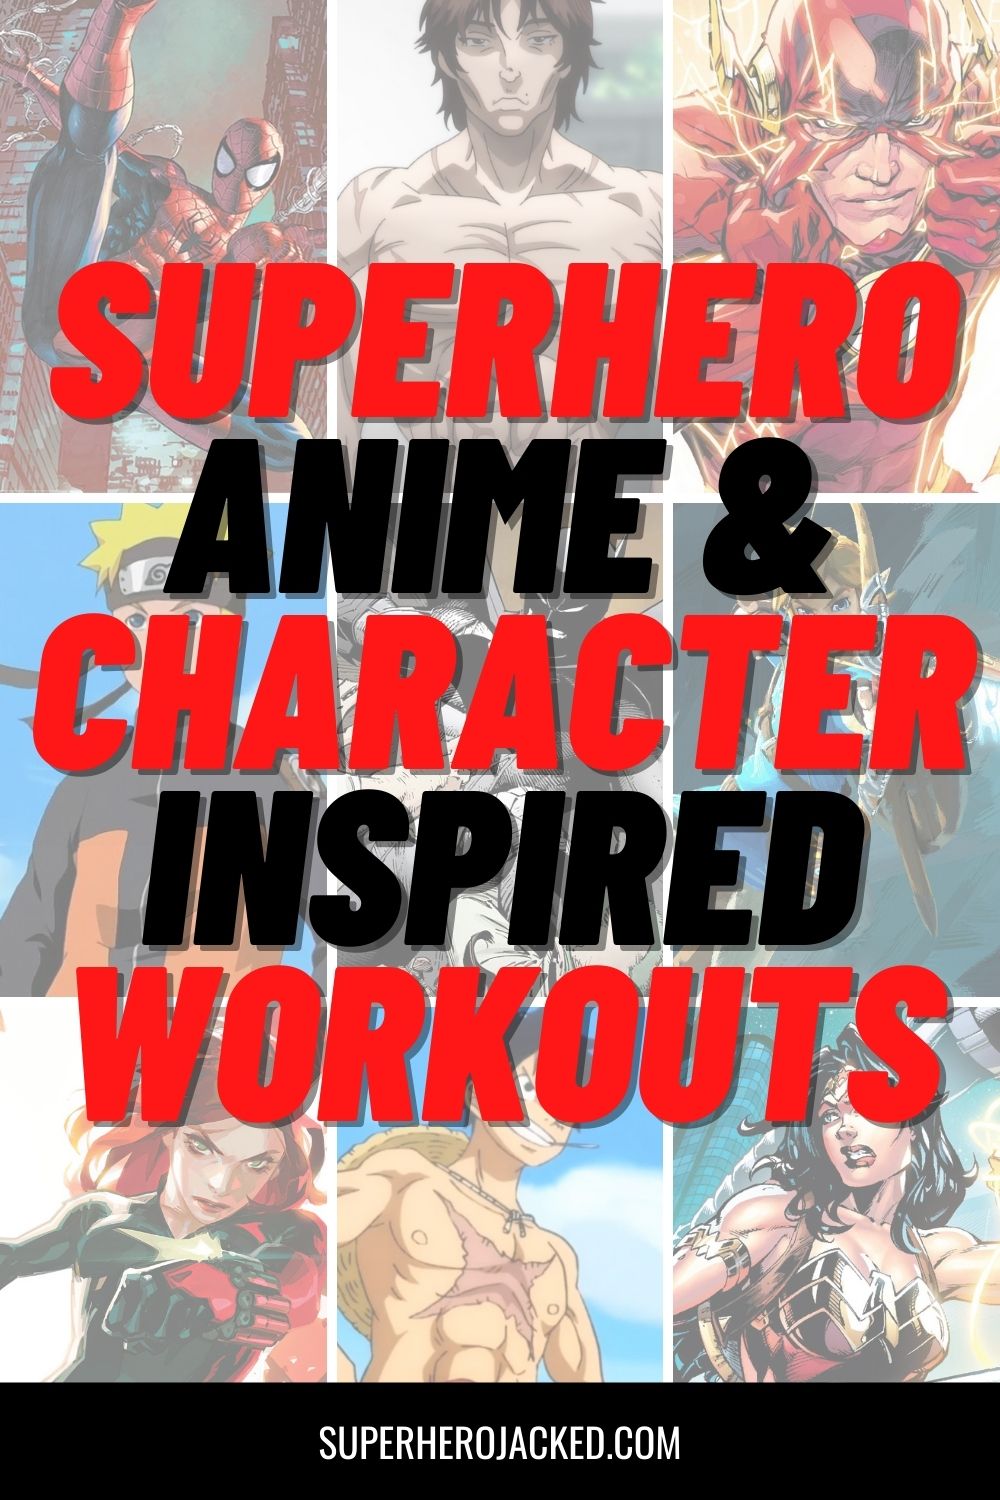 Character Inspired Workouts